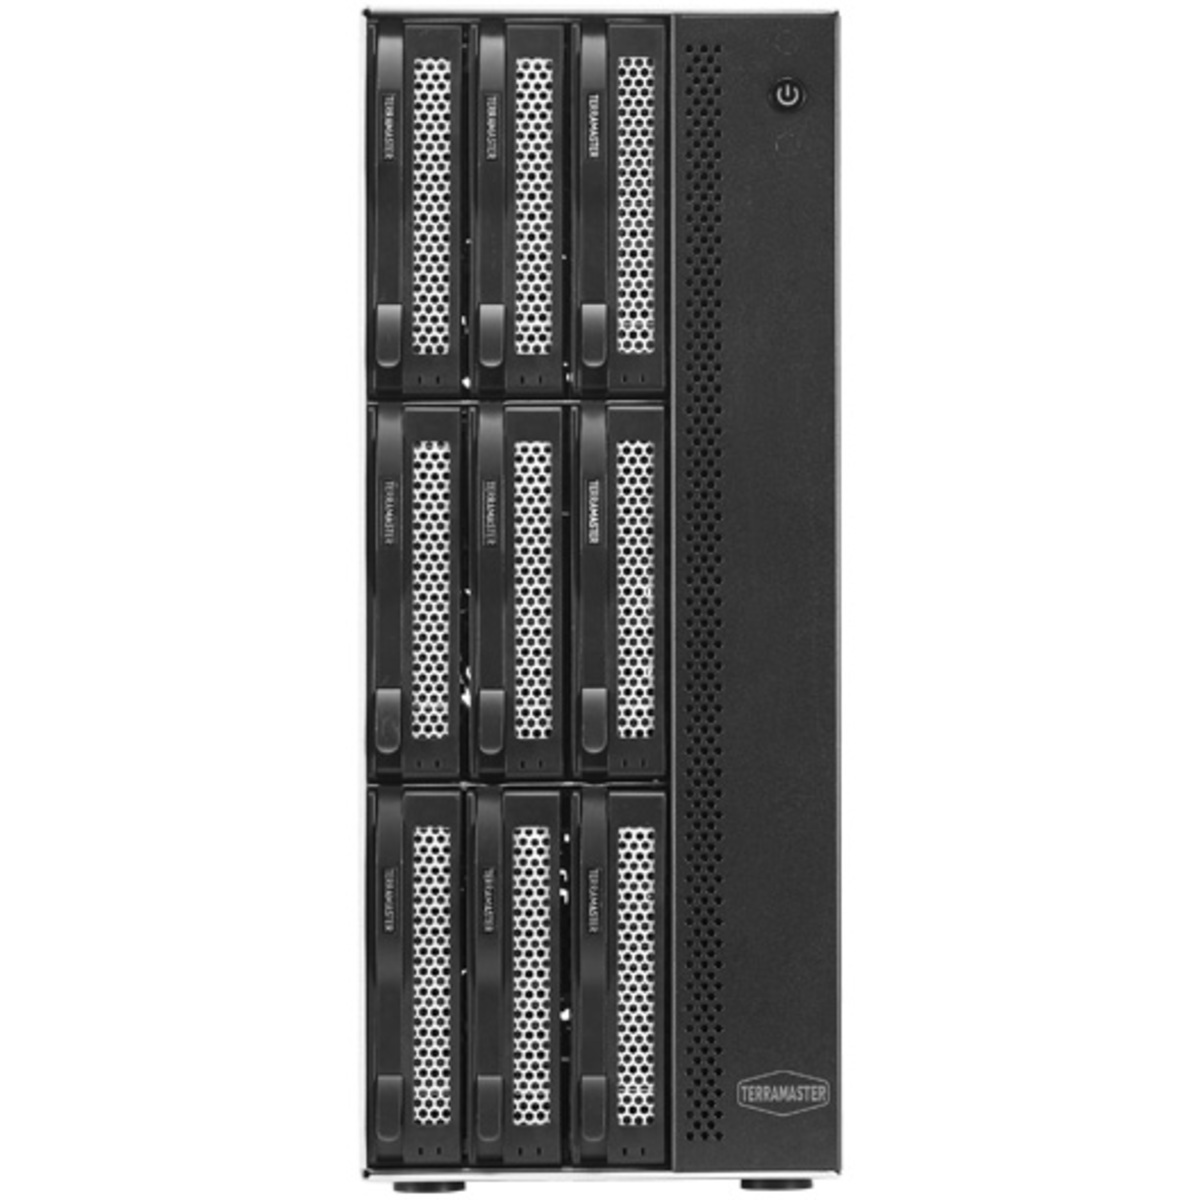 TerraMaster T9-450 32tb 9-Bay Desktop Multimedia / Power User / Business NAS - Network Attached Storage Device 8x4tb Western Digital Red Plus WD40EFPX 3.5 5400rpm SATA 6Gb/s HDD NAS Class Drives Installed - Burn-In Tested T9-450